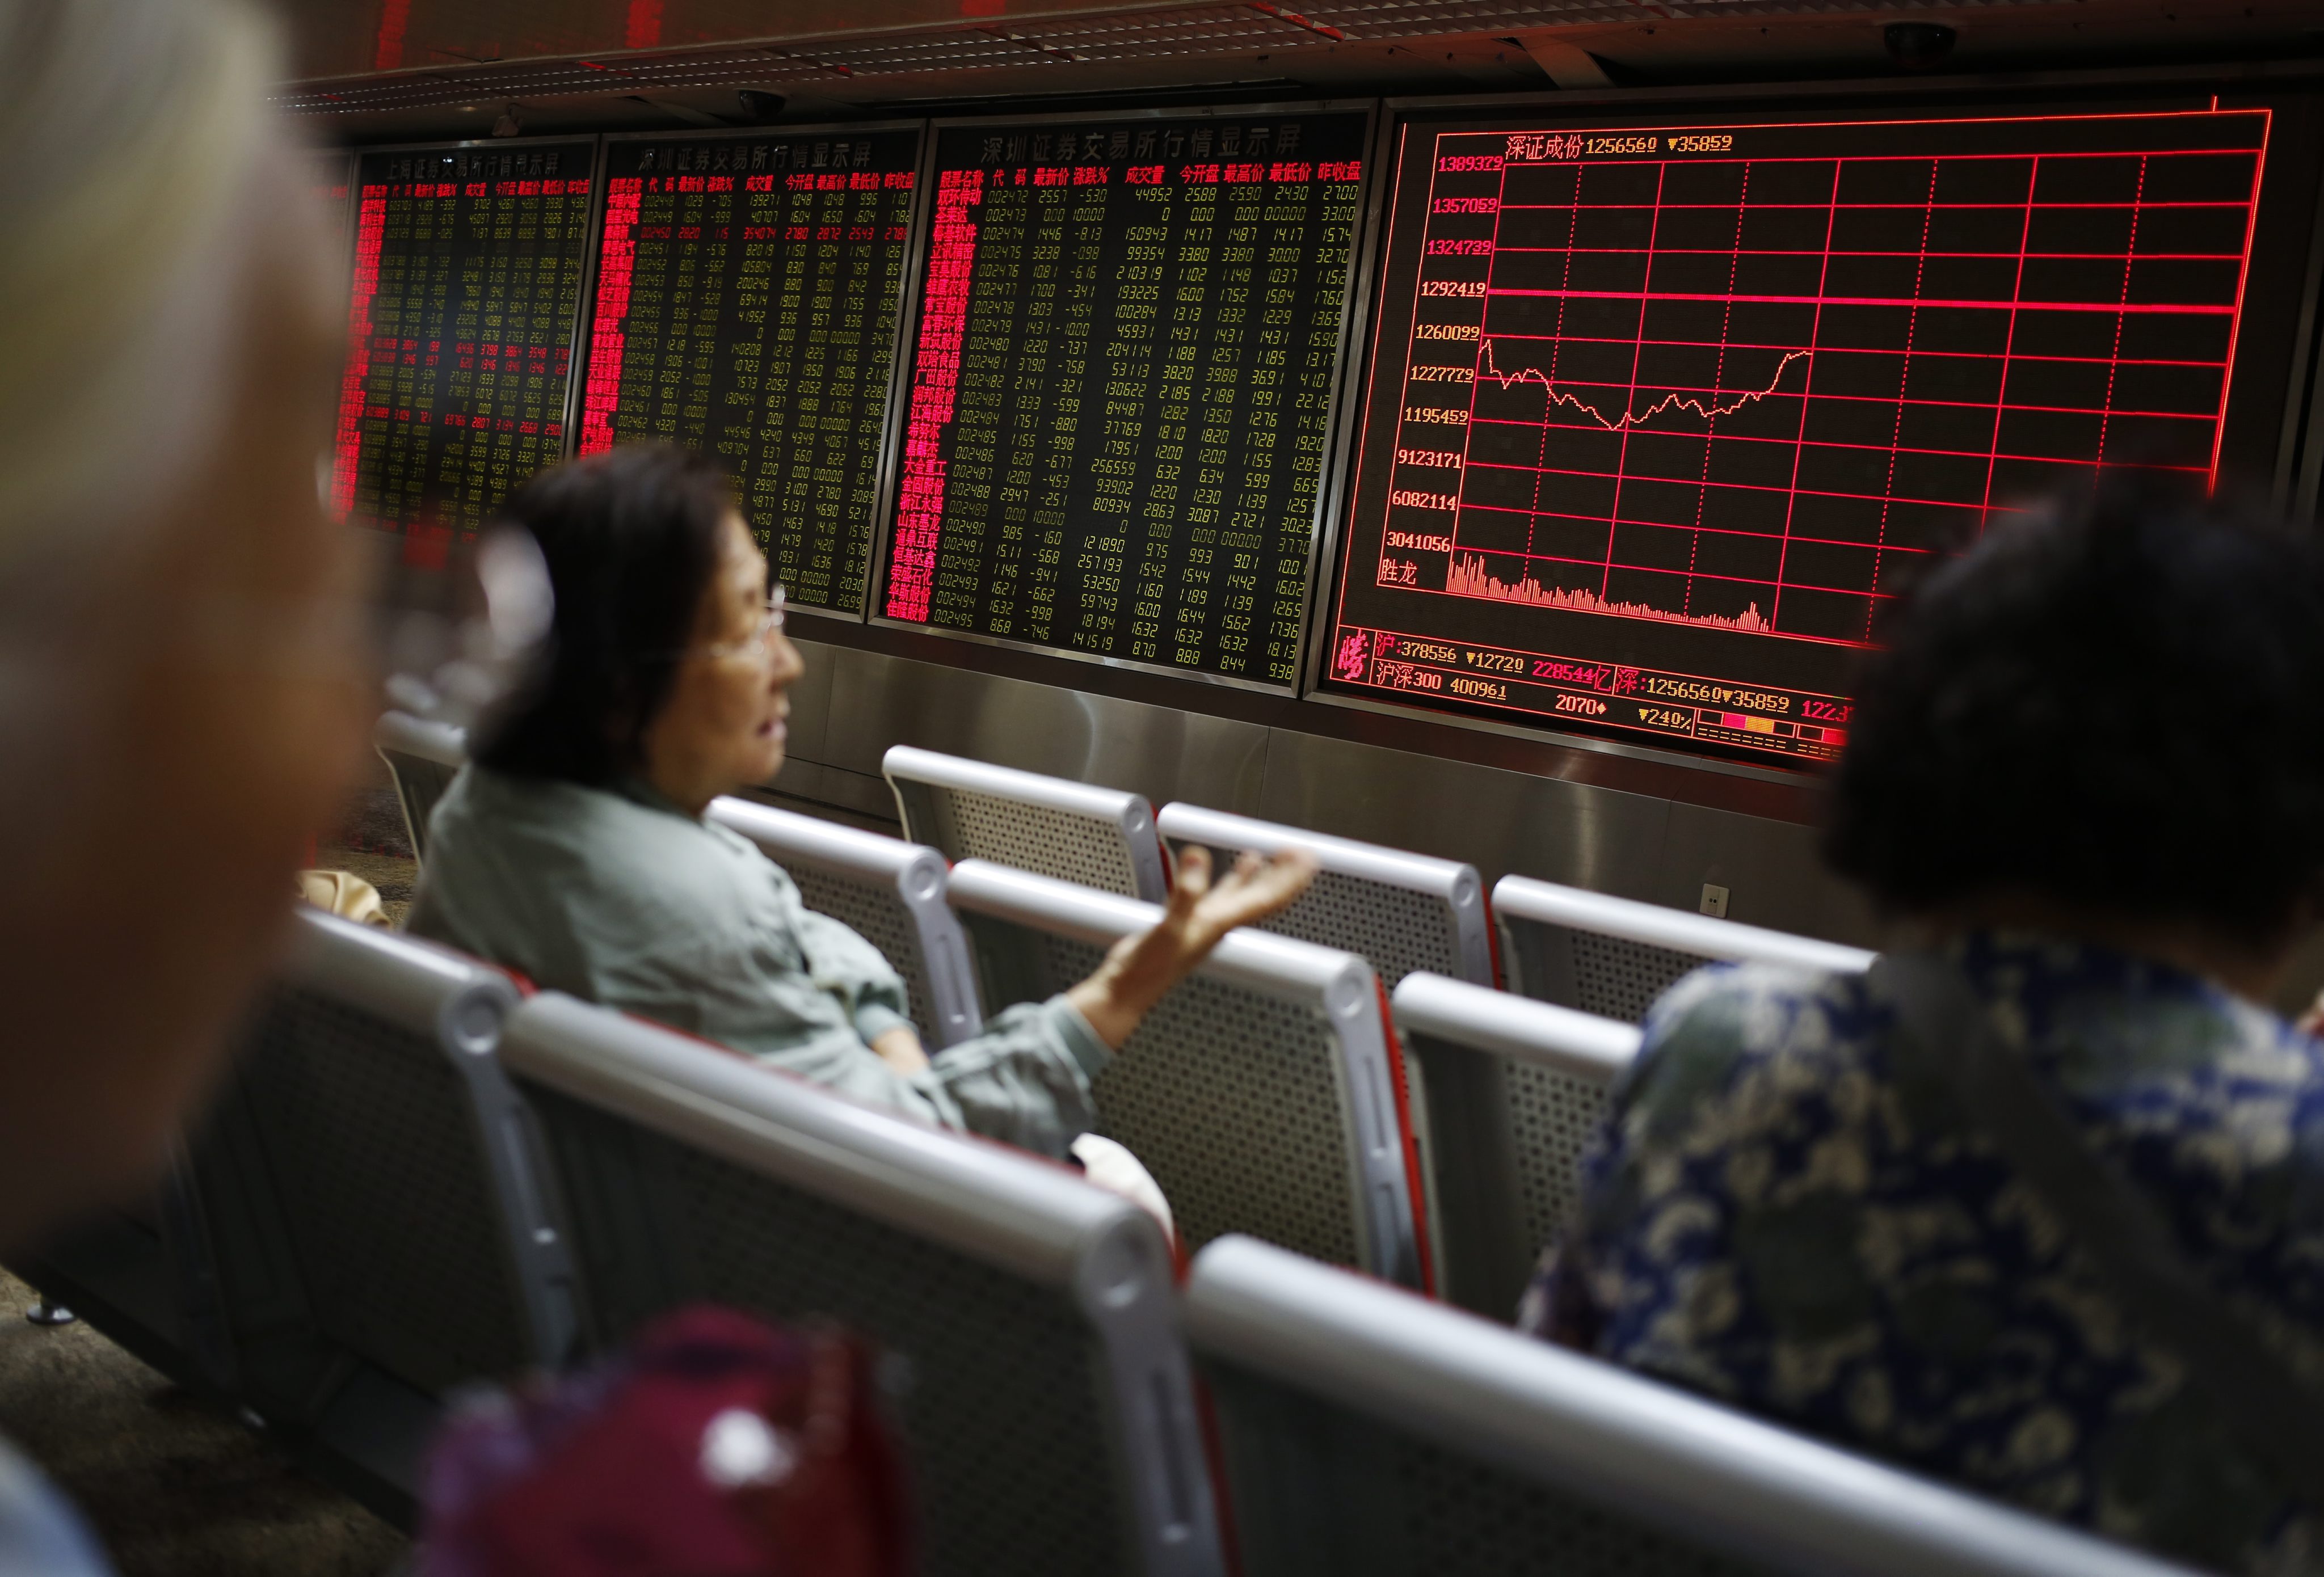 Investors face the prospect of fresh falls today if Beijing initiatives to support the volatile market fail to restore confidence. Photo: EPA